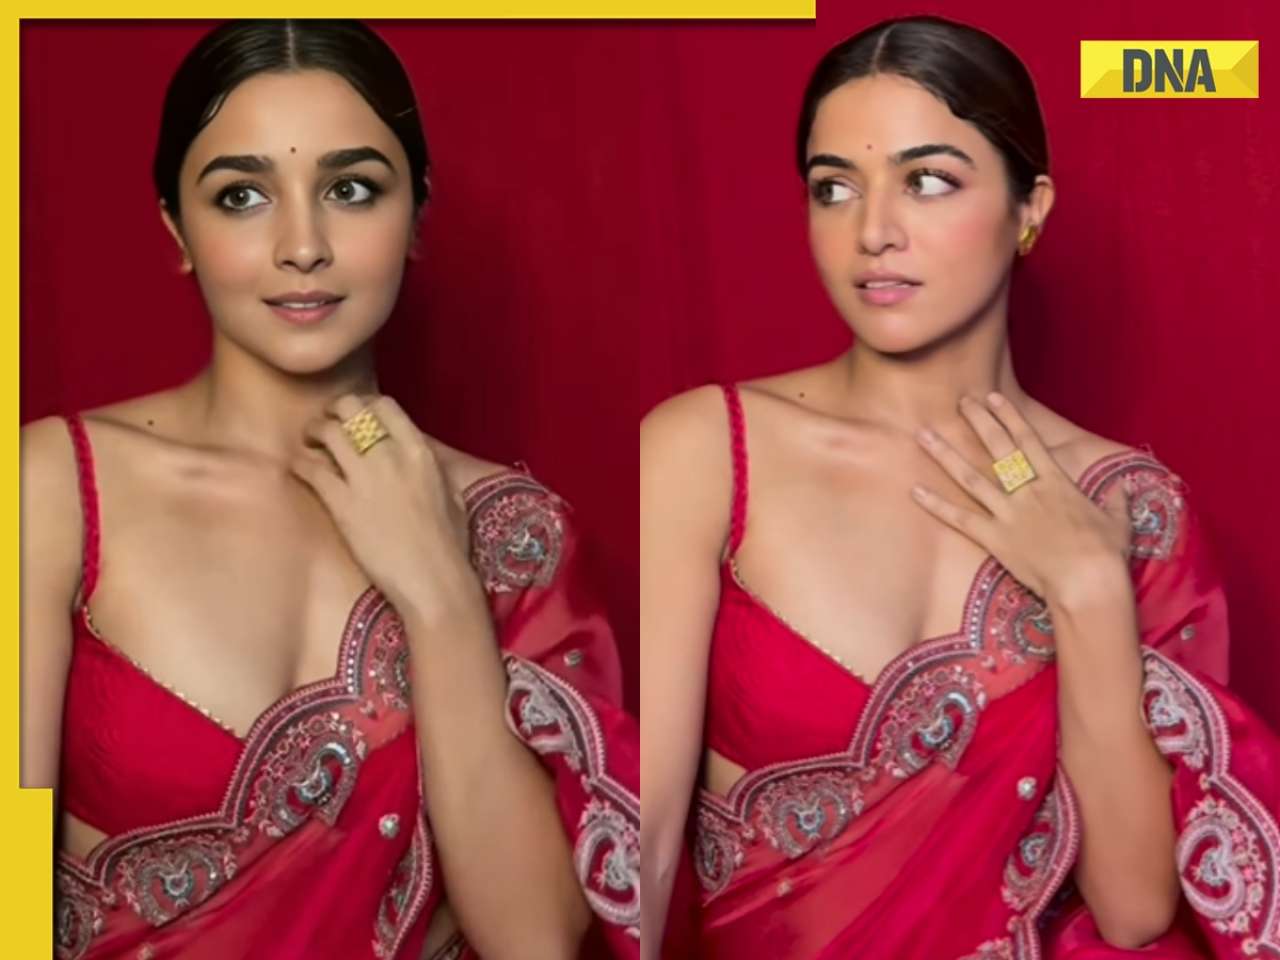 Alia Bhatt's face morphed on Wamiqa Gabbi in deepfake video, shocked netizens say 'this is so scary'